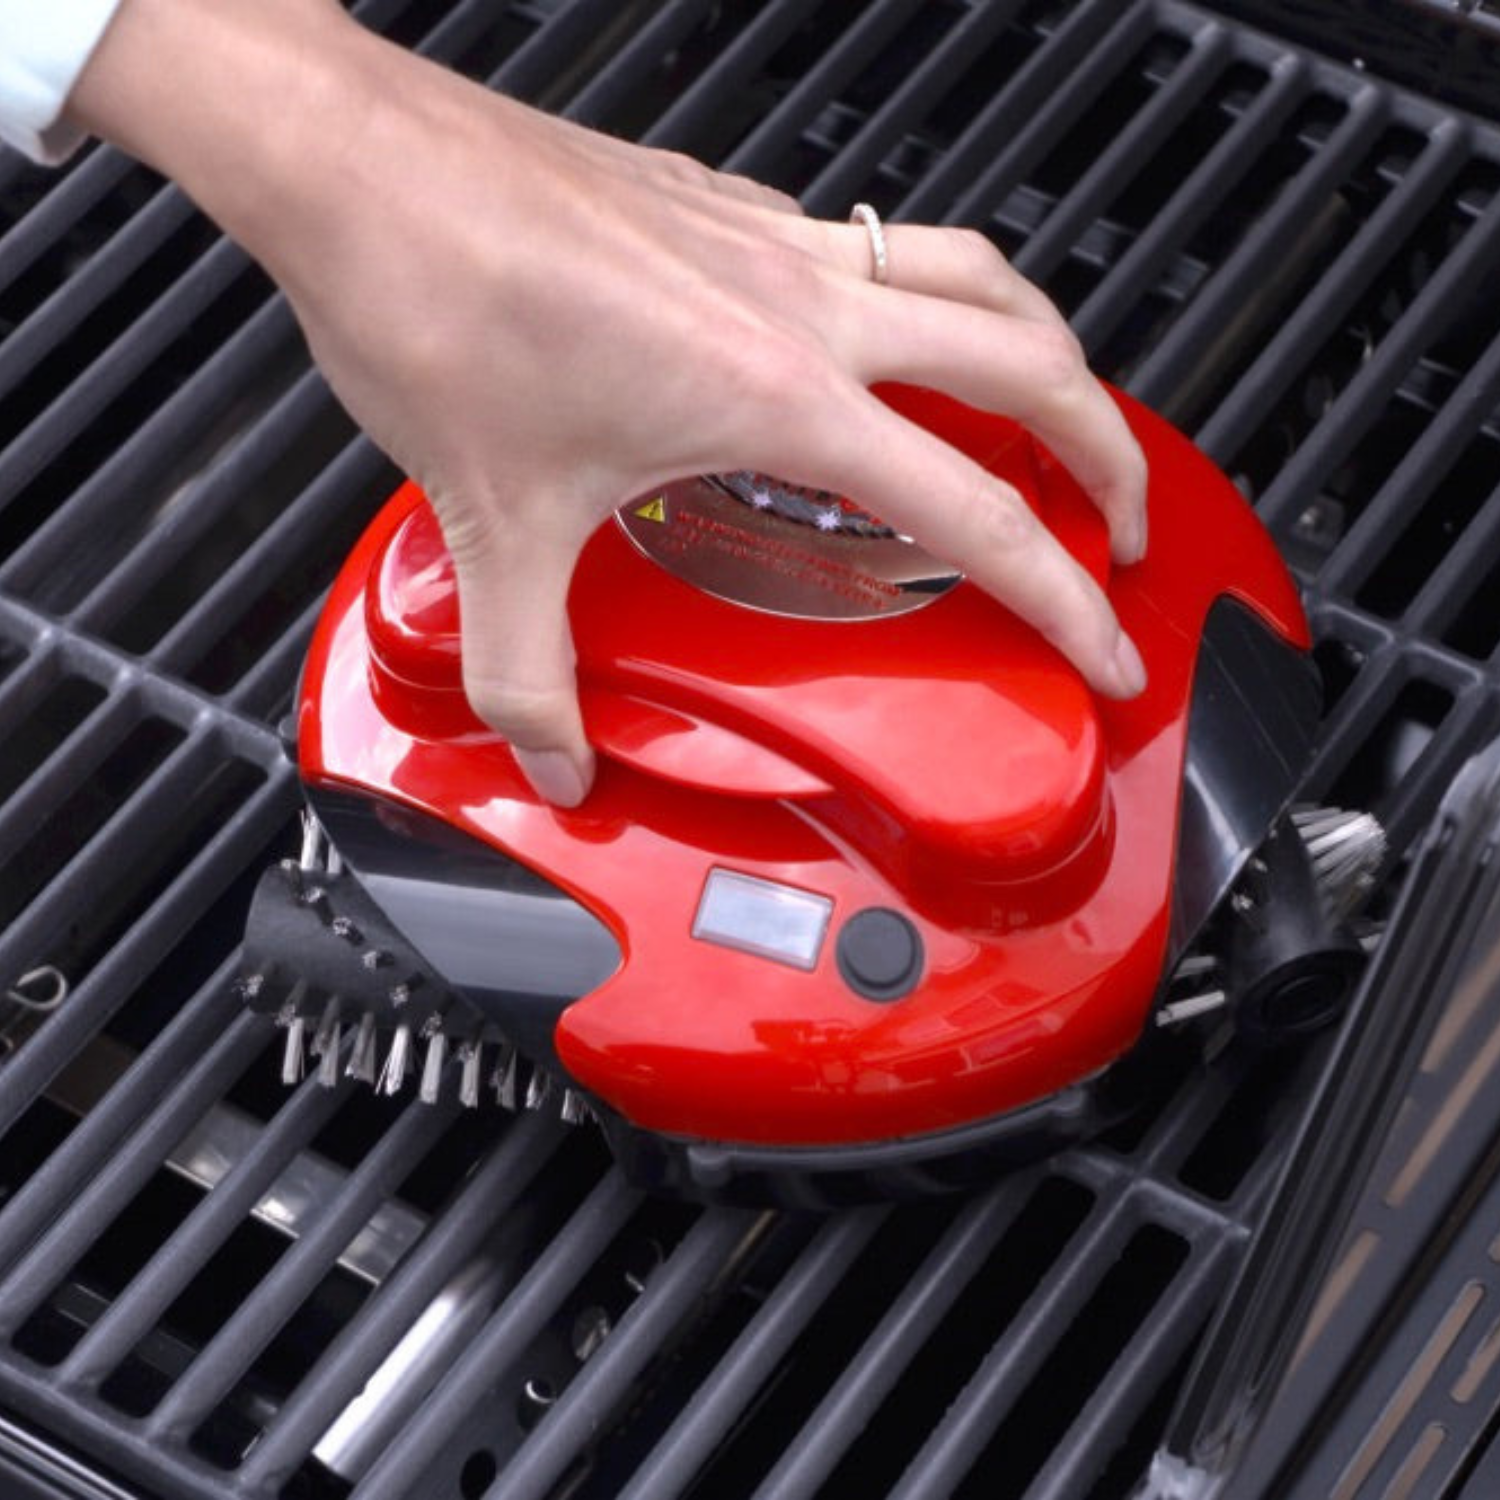 Review: Grillbot Robot Grill Cleaner